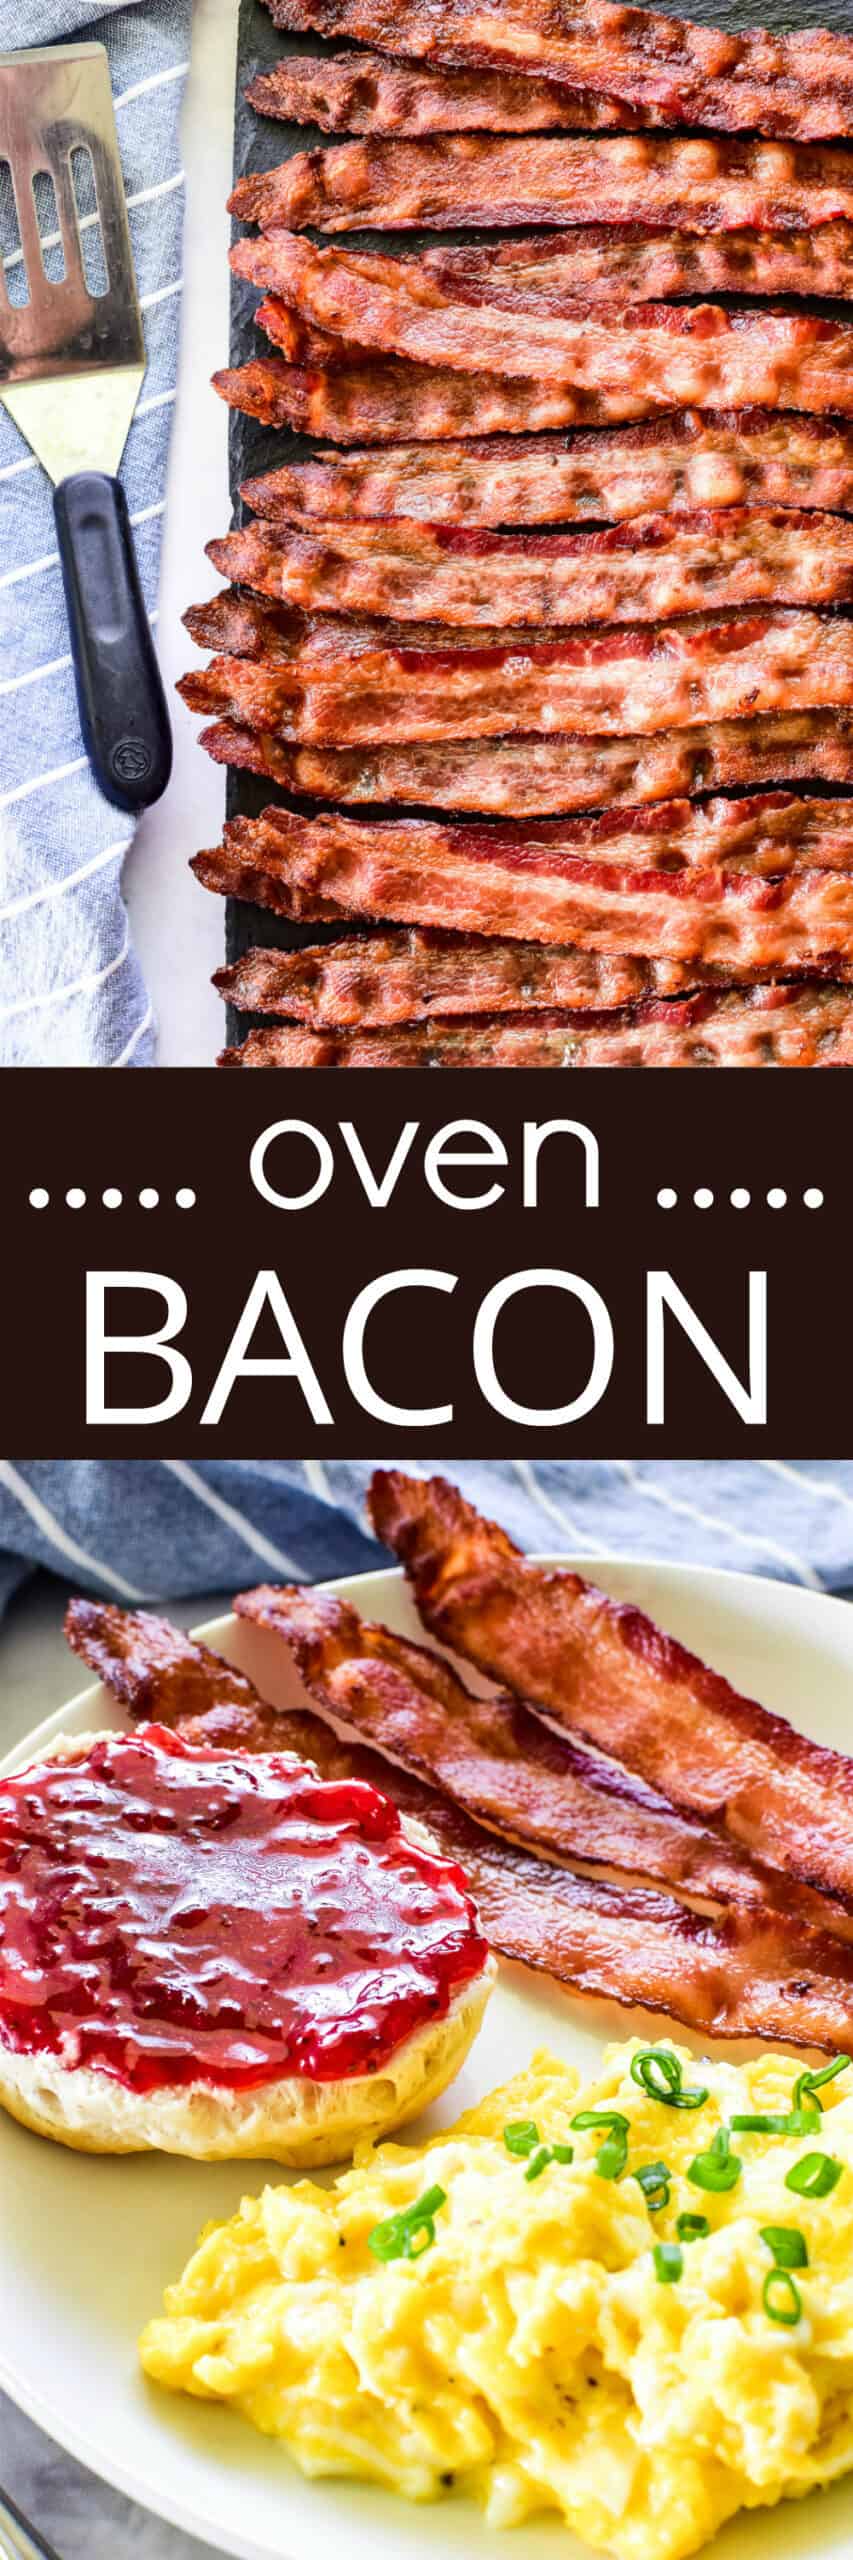 https://lemontreedwelling.com/wp-content/uploads/2020/05/oven-bacon-pin-scaled.jpg